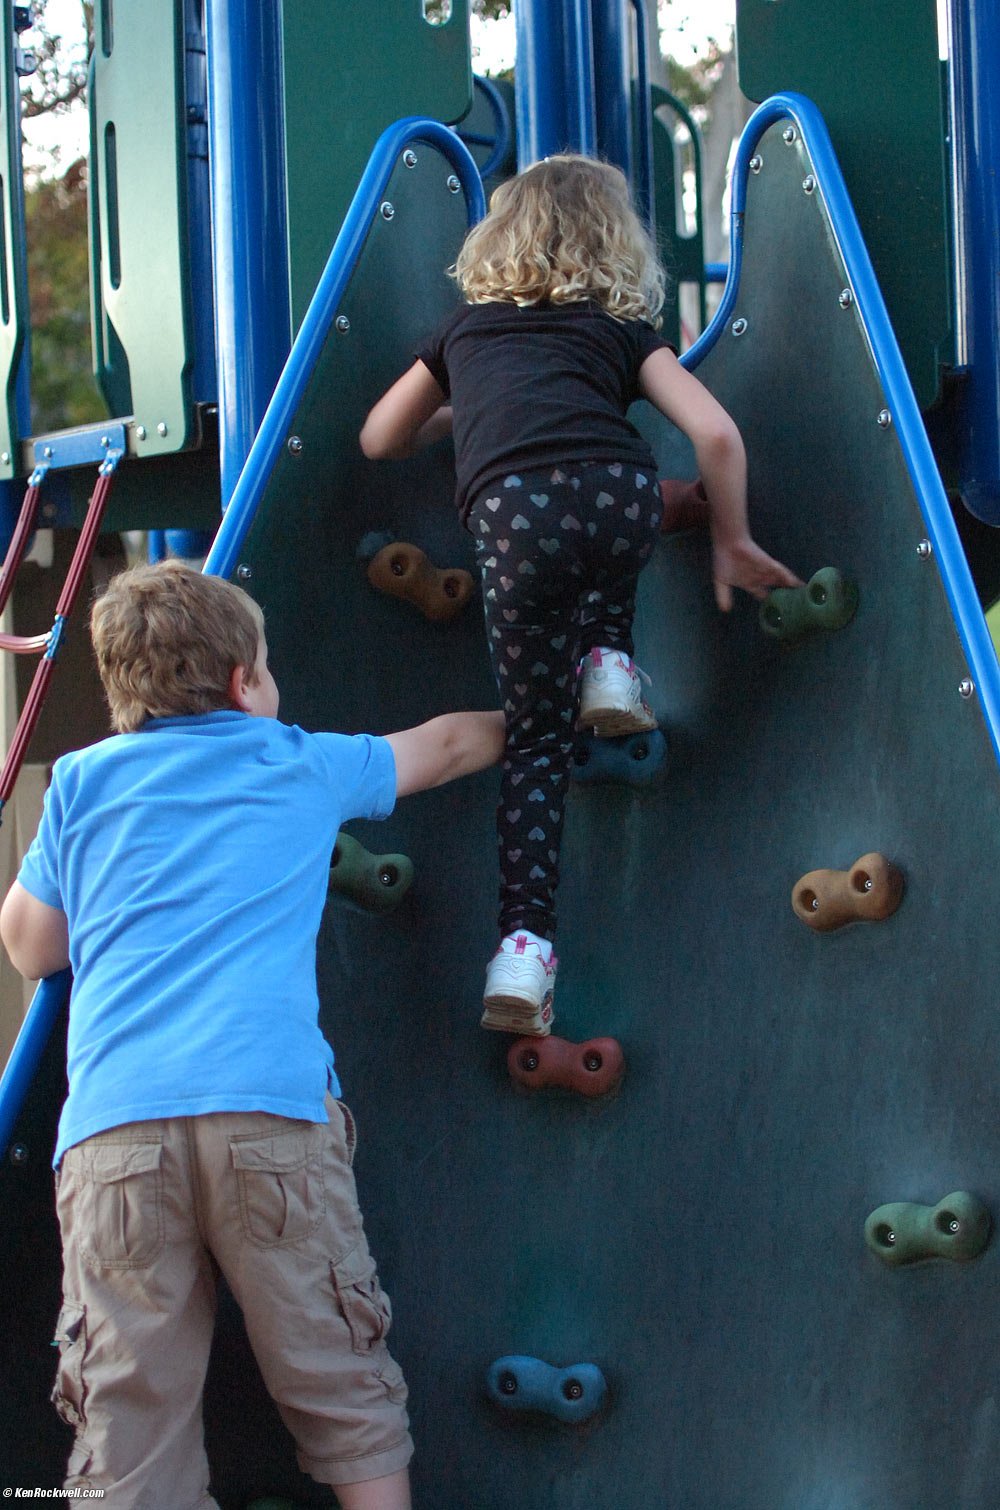 Katie and Ryan climbing at the park.